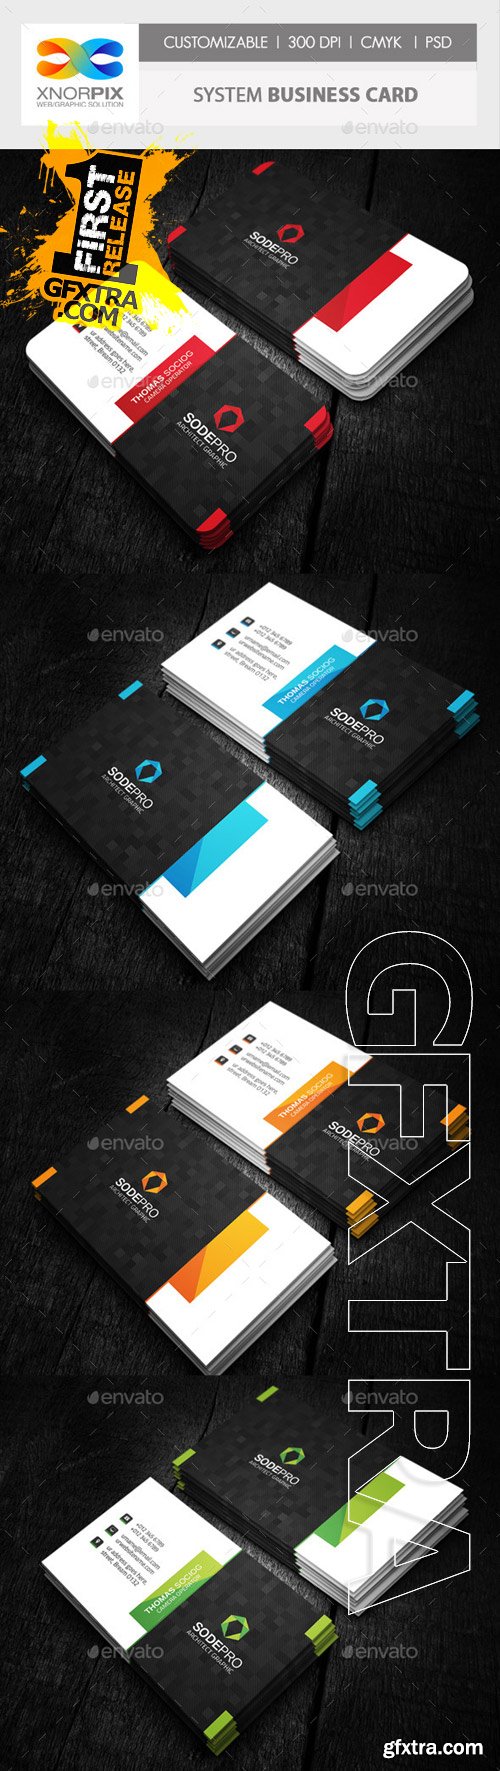 GraphicRiver - System Business Card